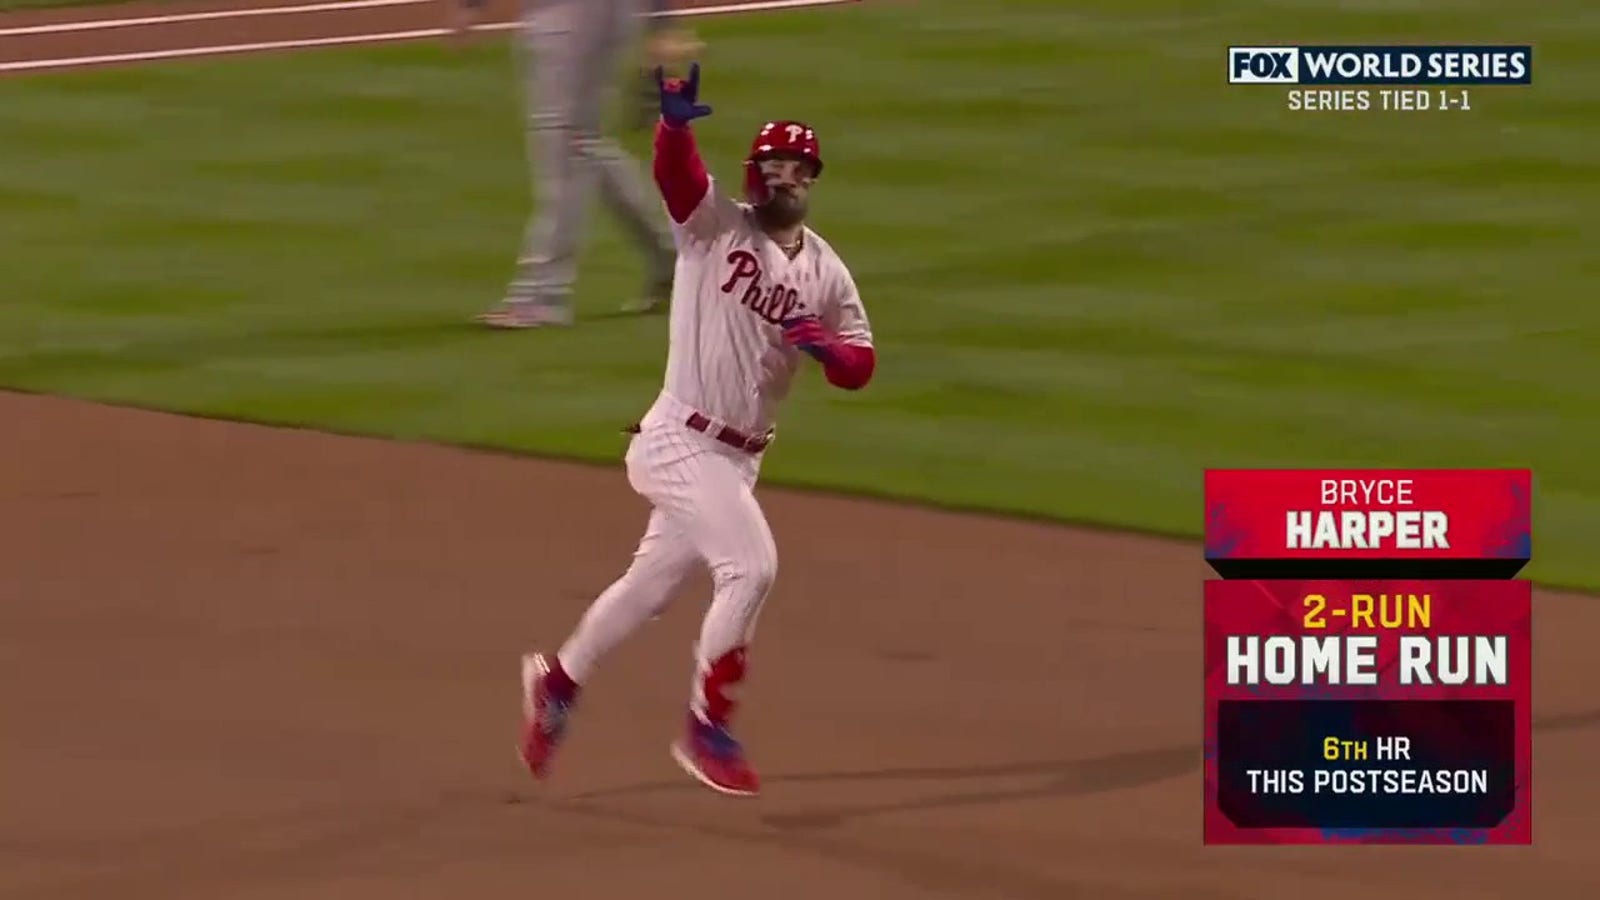 Bryce Harper cranks out a two-run home run to give the Phillies a 2-0 early lead